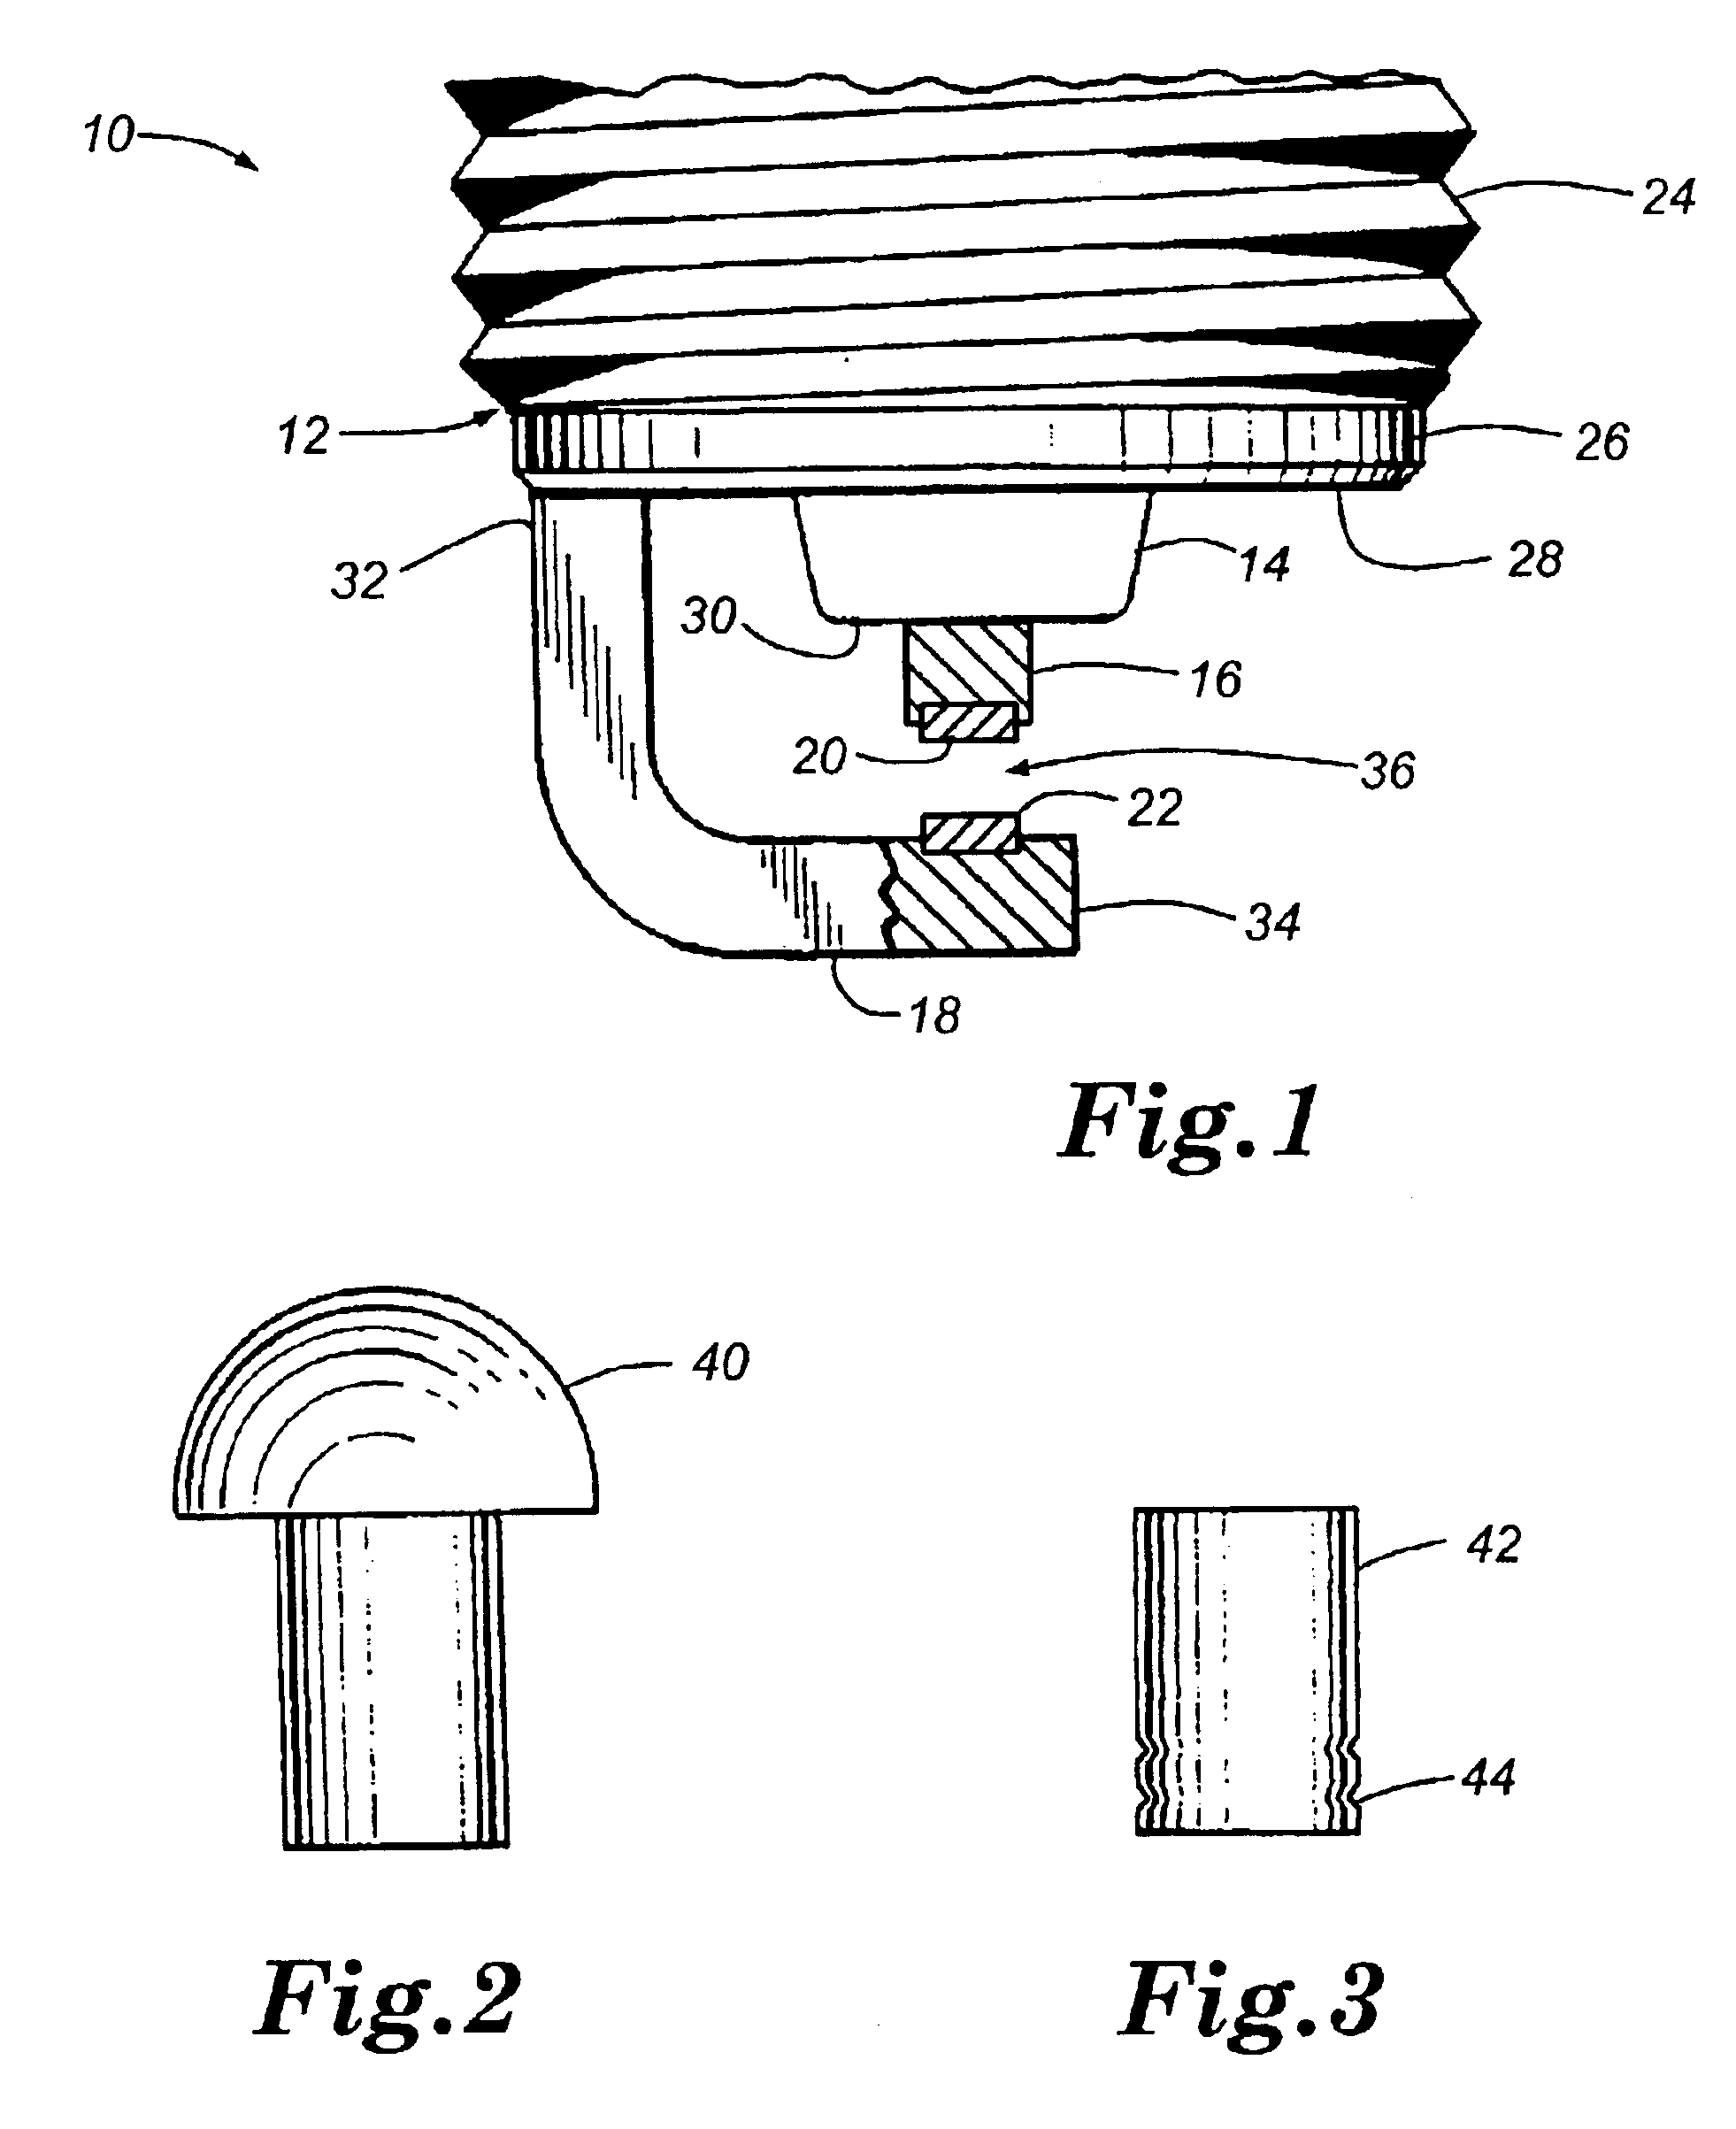 Ignition device having an electrode formed from an iridium-based alloy